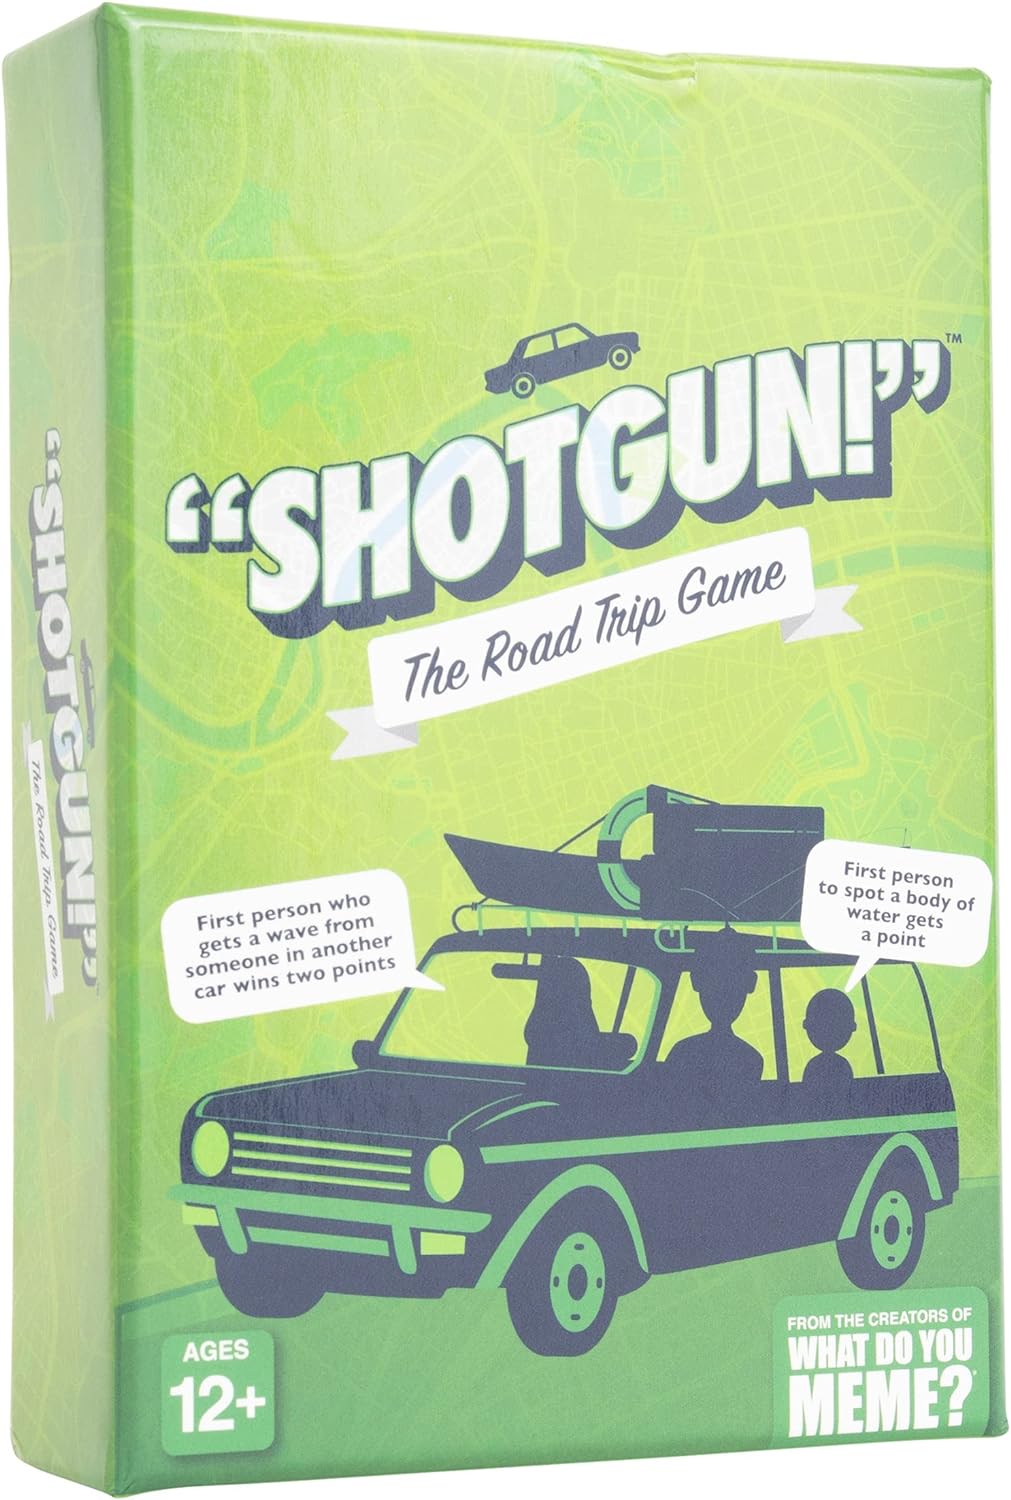 WHAT DO YOU MEME? Shotgun! - The Hilarious Family Card Game for Road Trips Family